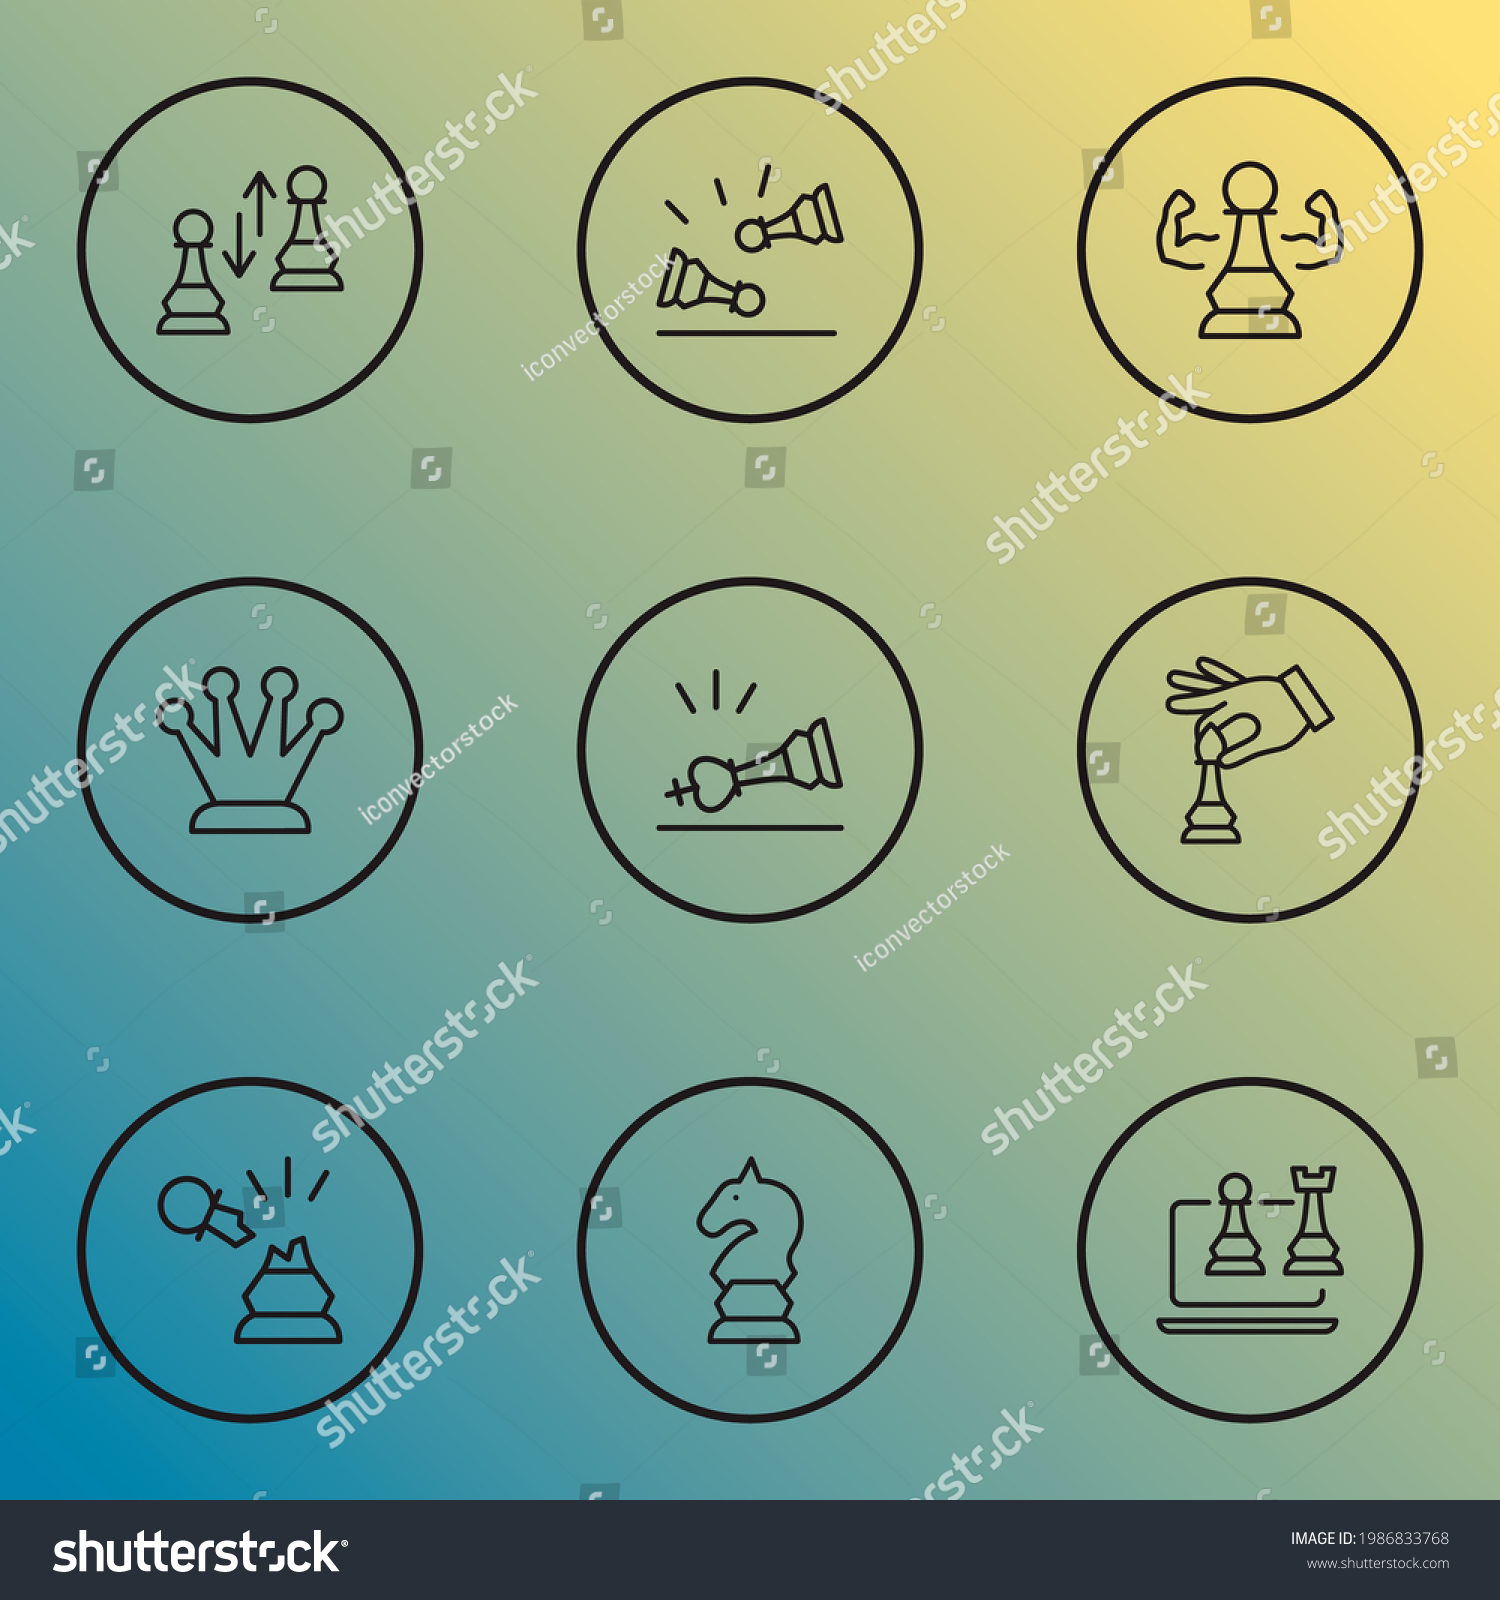 Chess icons line style set with hand with bishop, pawn exchange, kings crown competition elements. Isolated vector illustration chess icons. #1986833768